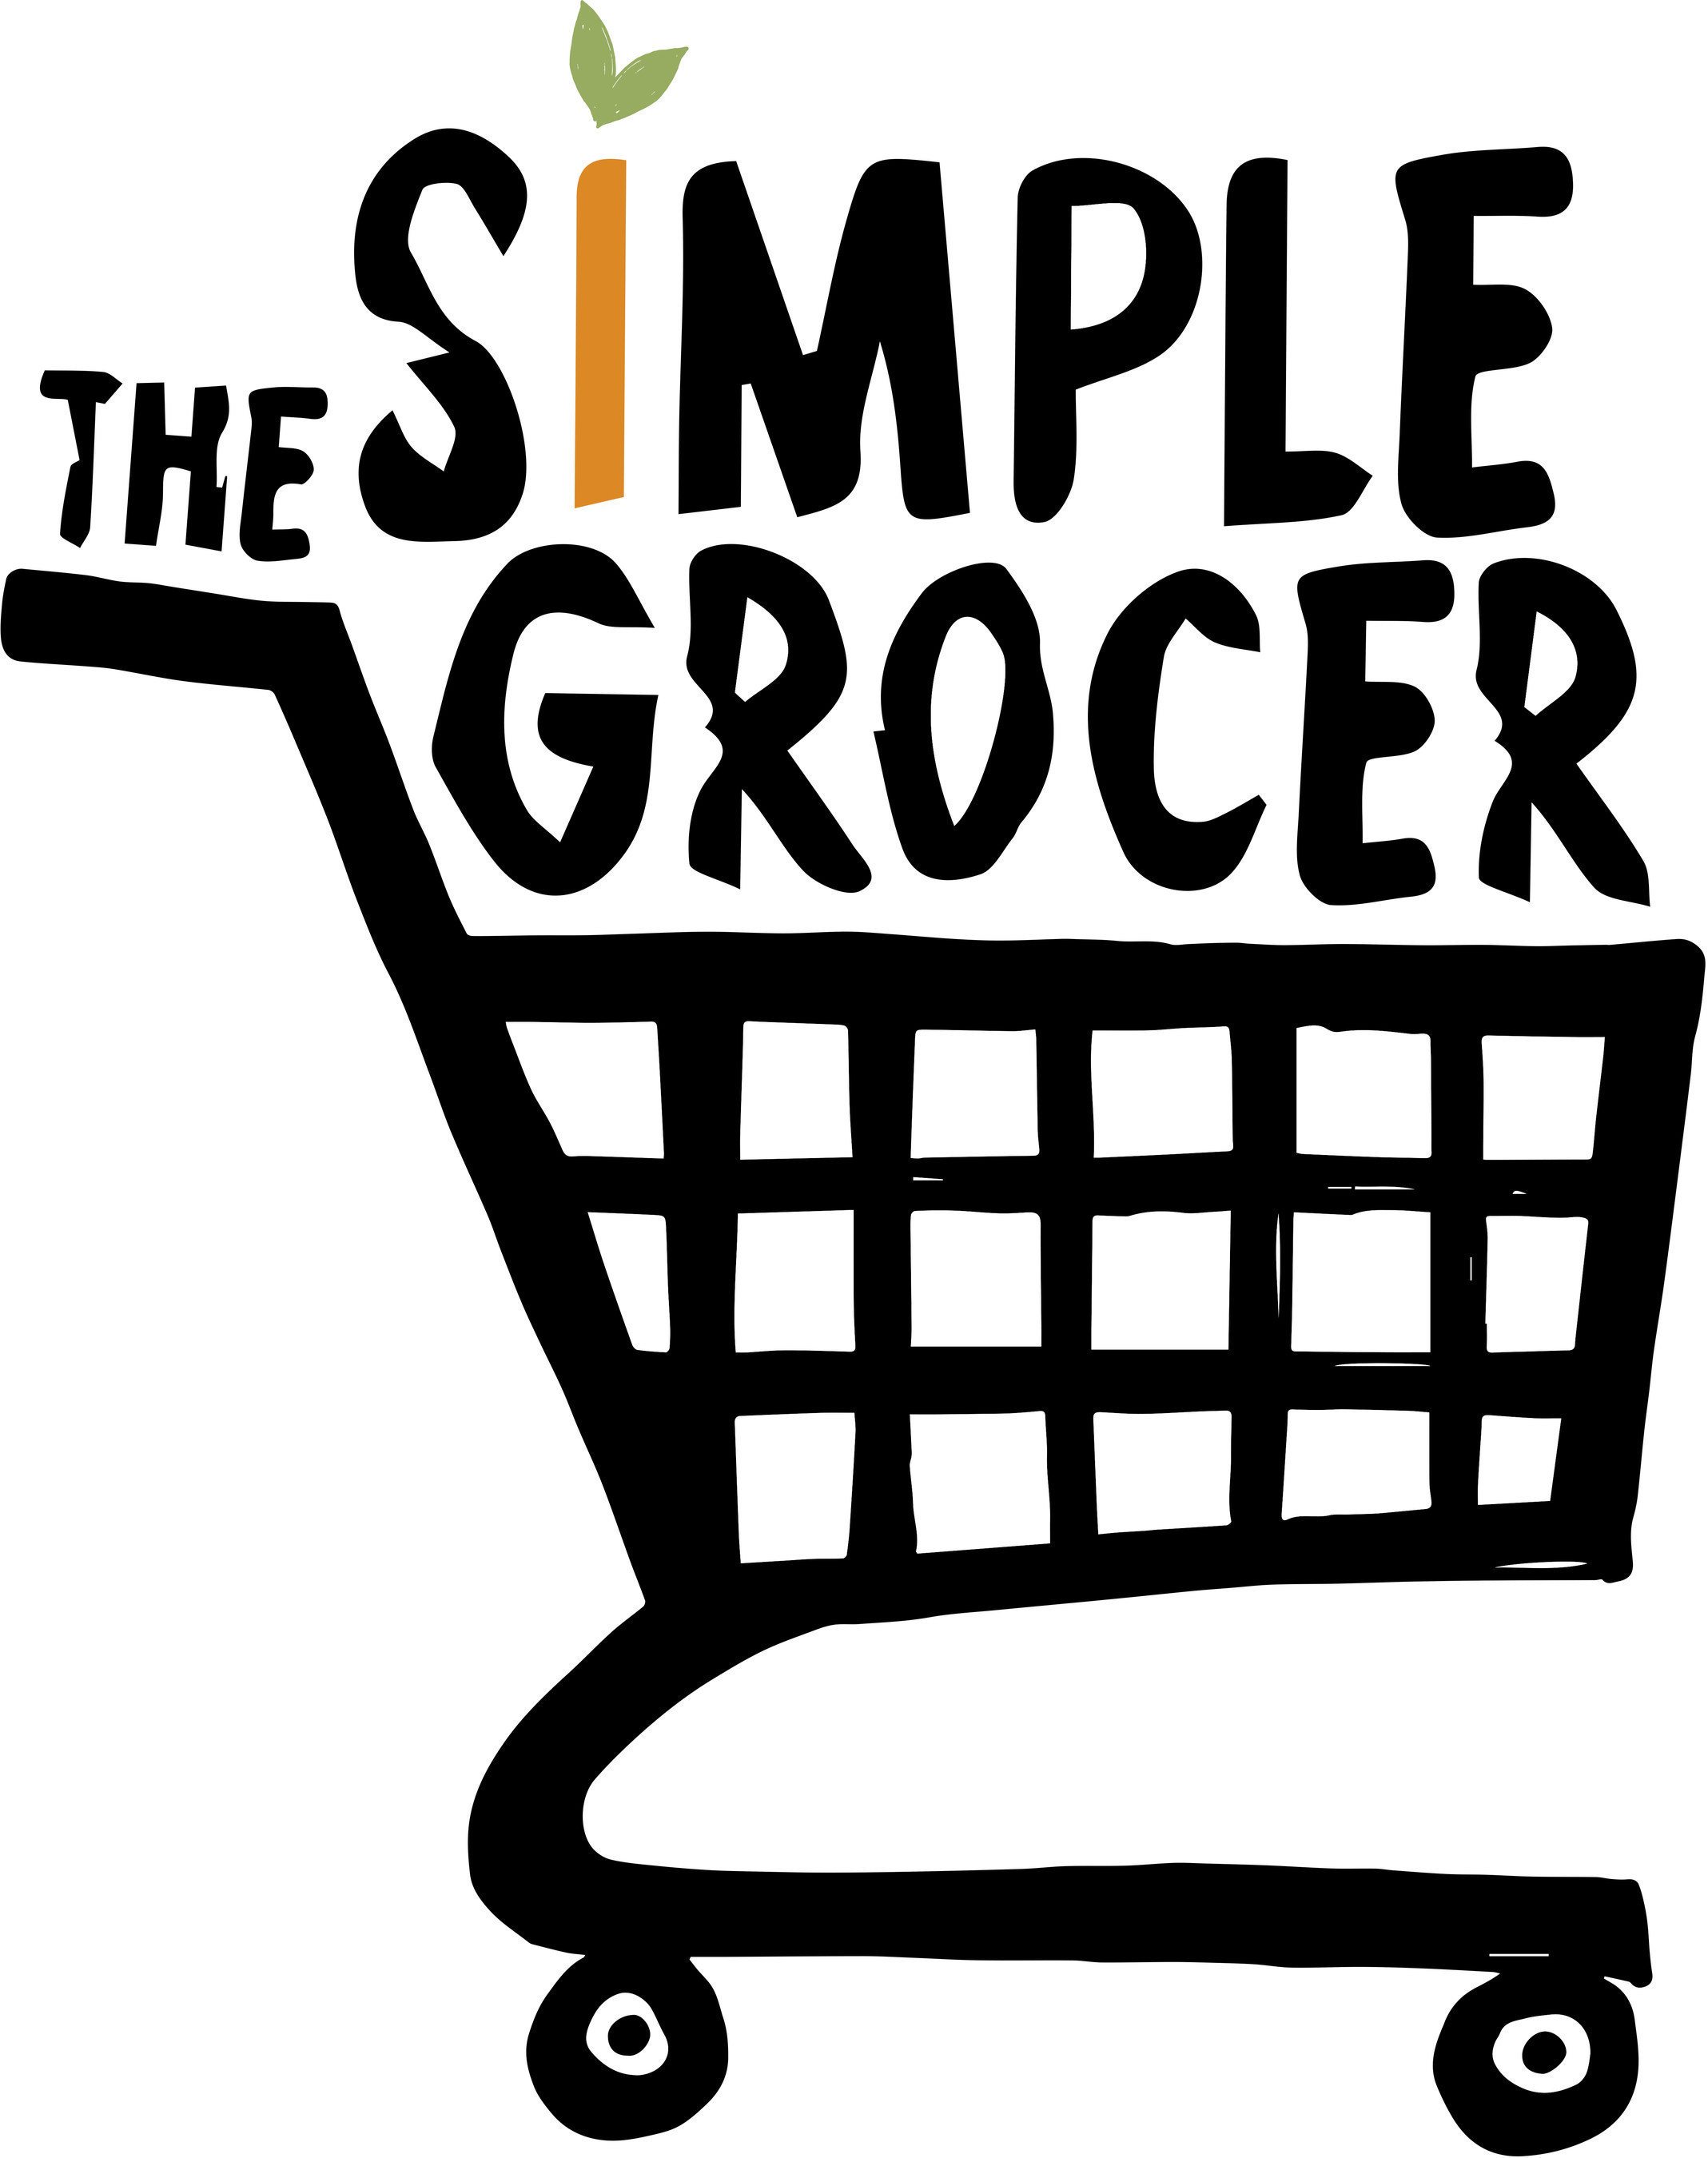 The Simple Grocer: Bringing Whole30 and Paleo friendly foods to your doorstep.